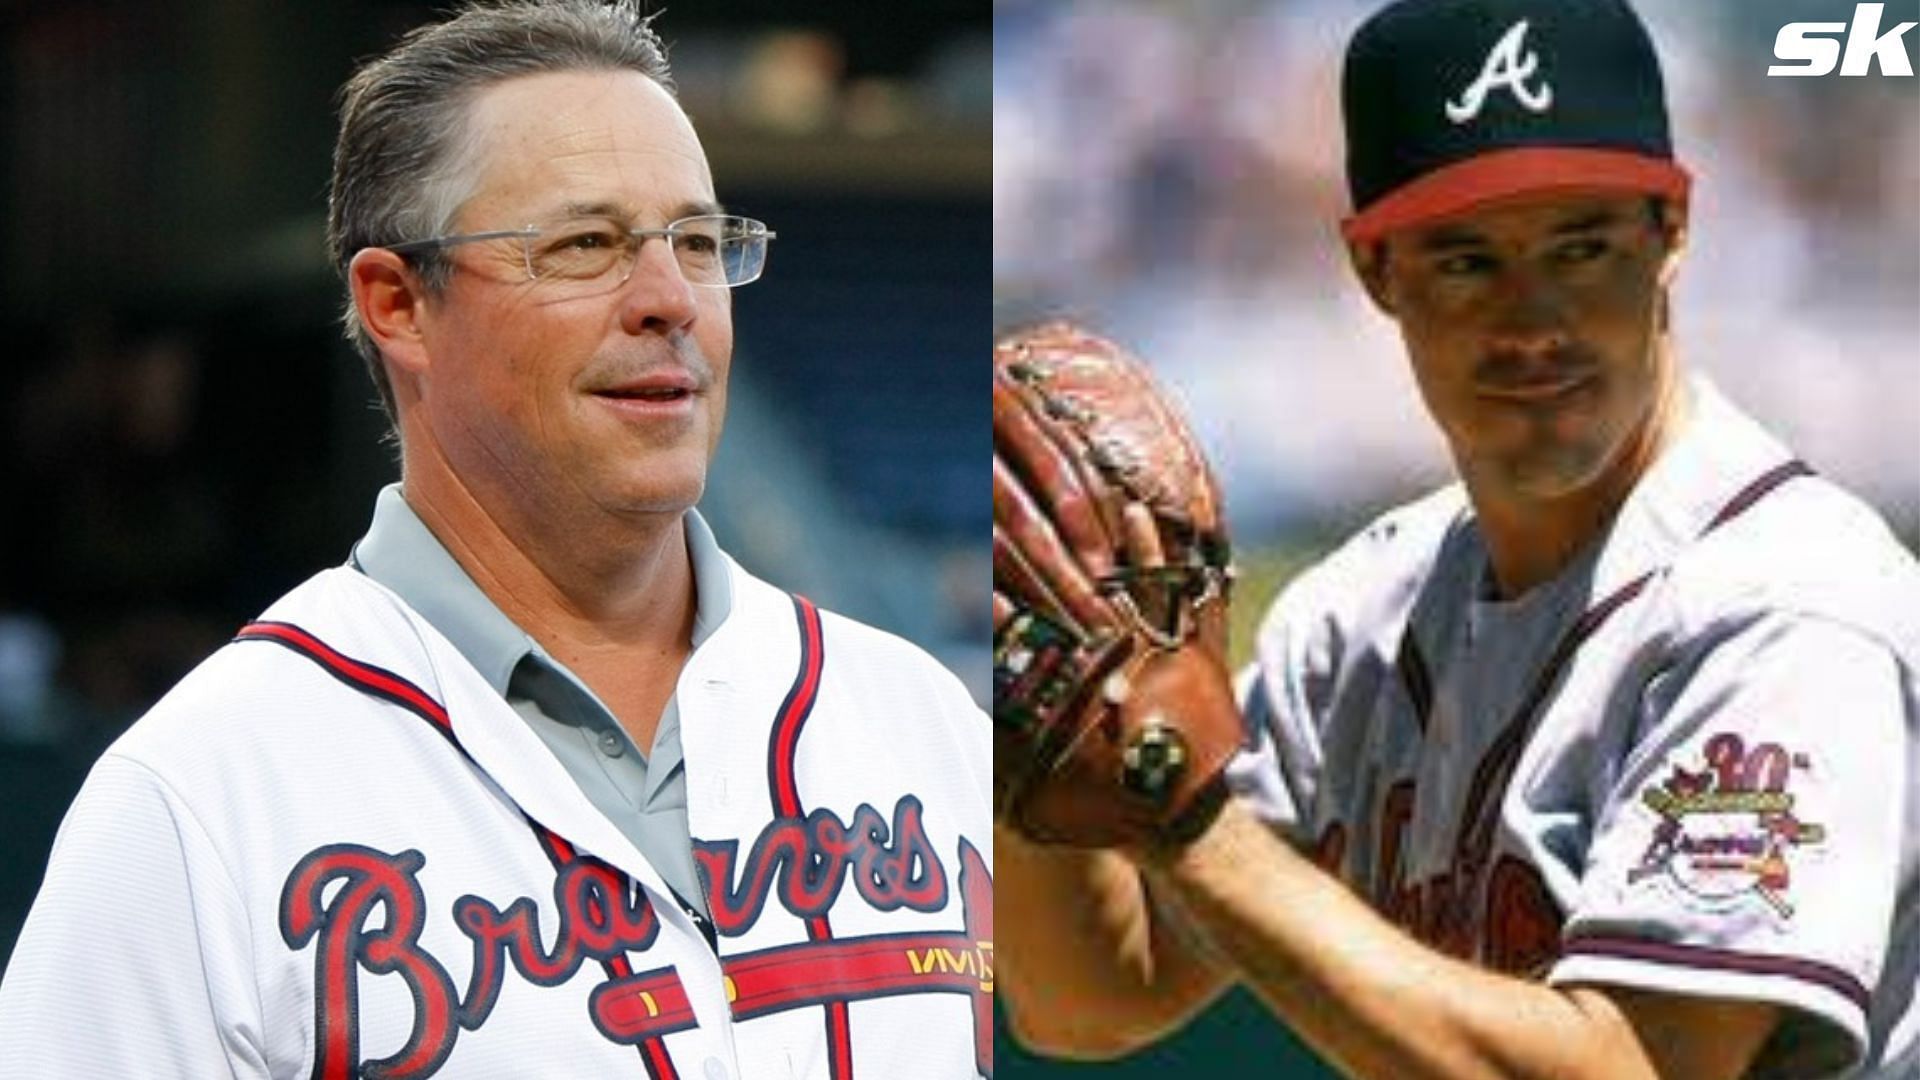 Greg Maddux on X: .@Eperez1212 thanks for catching it a lot of my catchers  might have missed that @Braves #WorldSeries  / X